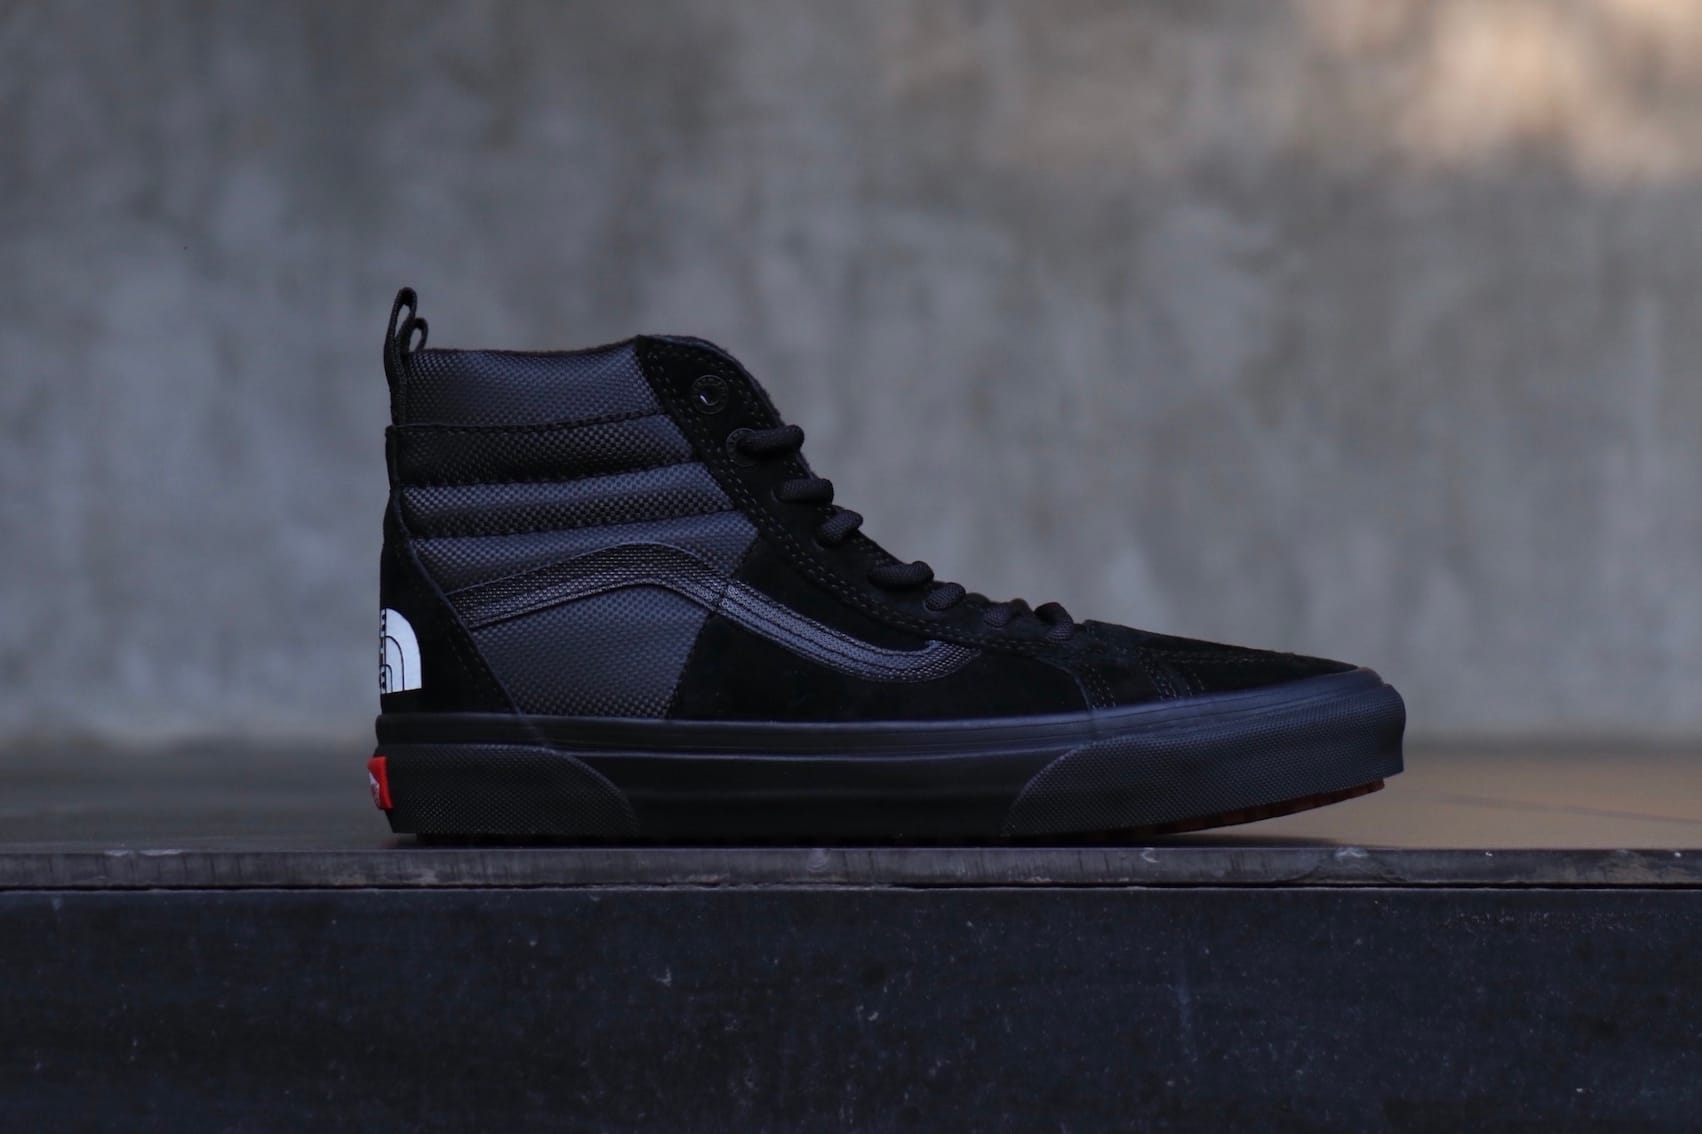 vans north face collab shoes